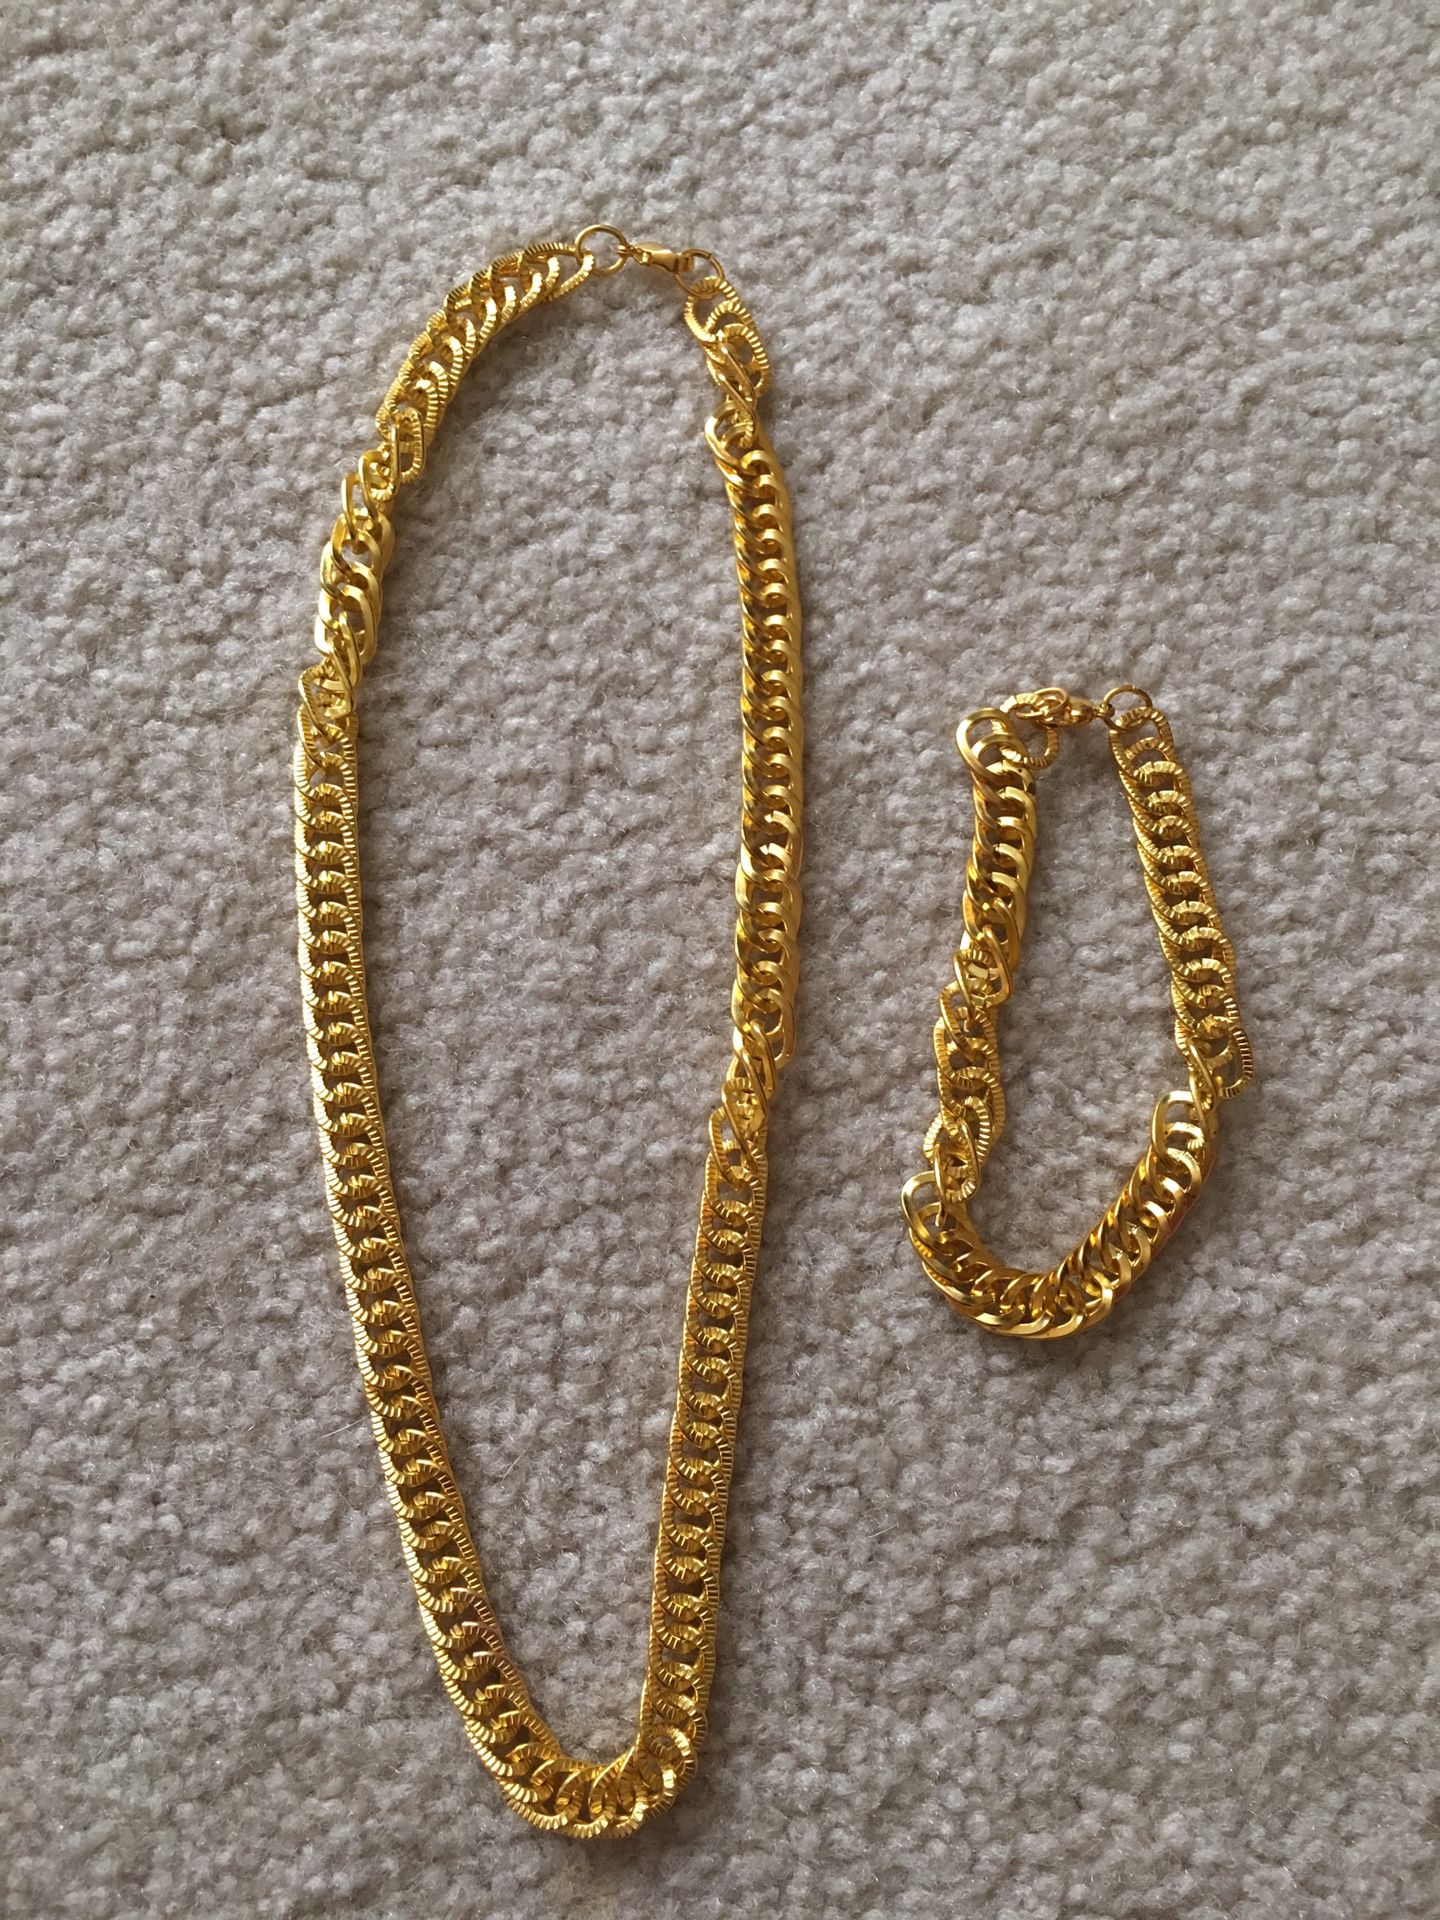 New unisex gold filled chain and bracelet